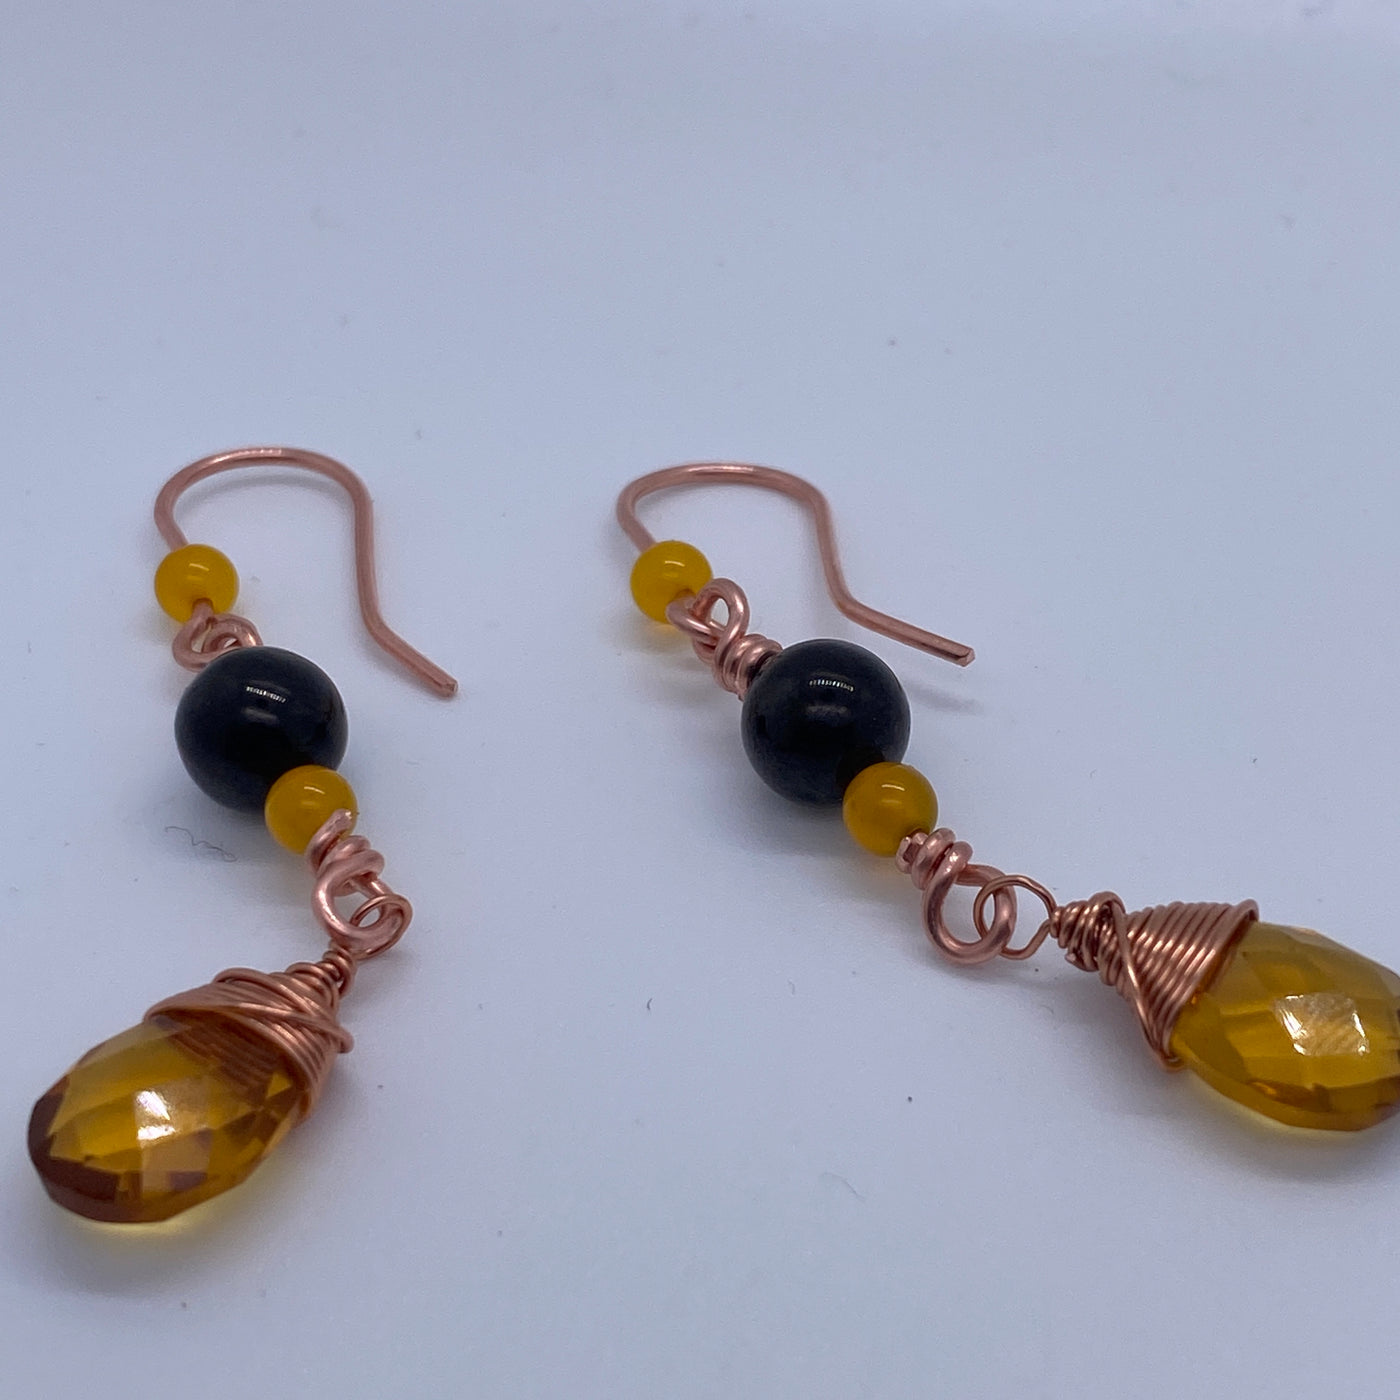 Earrings on wire with yellow agate, citrine briolette and black beads. These earrings are approximately 6 cm long.